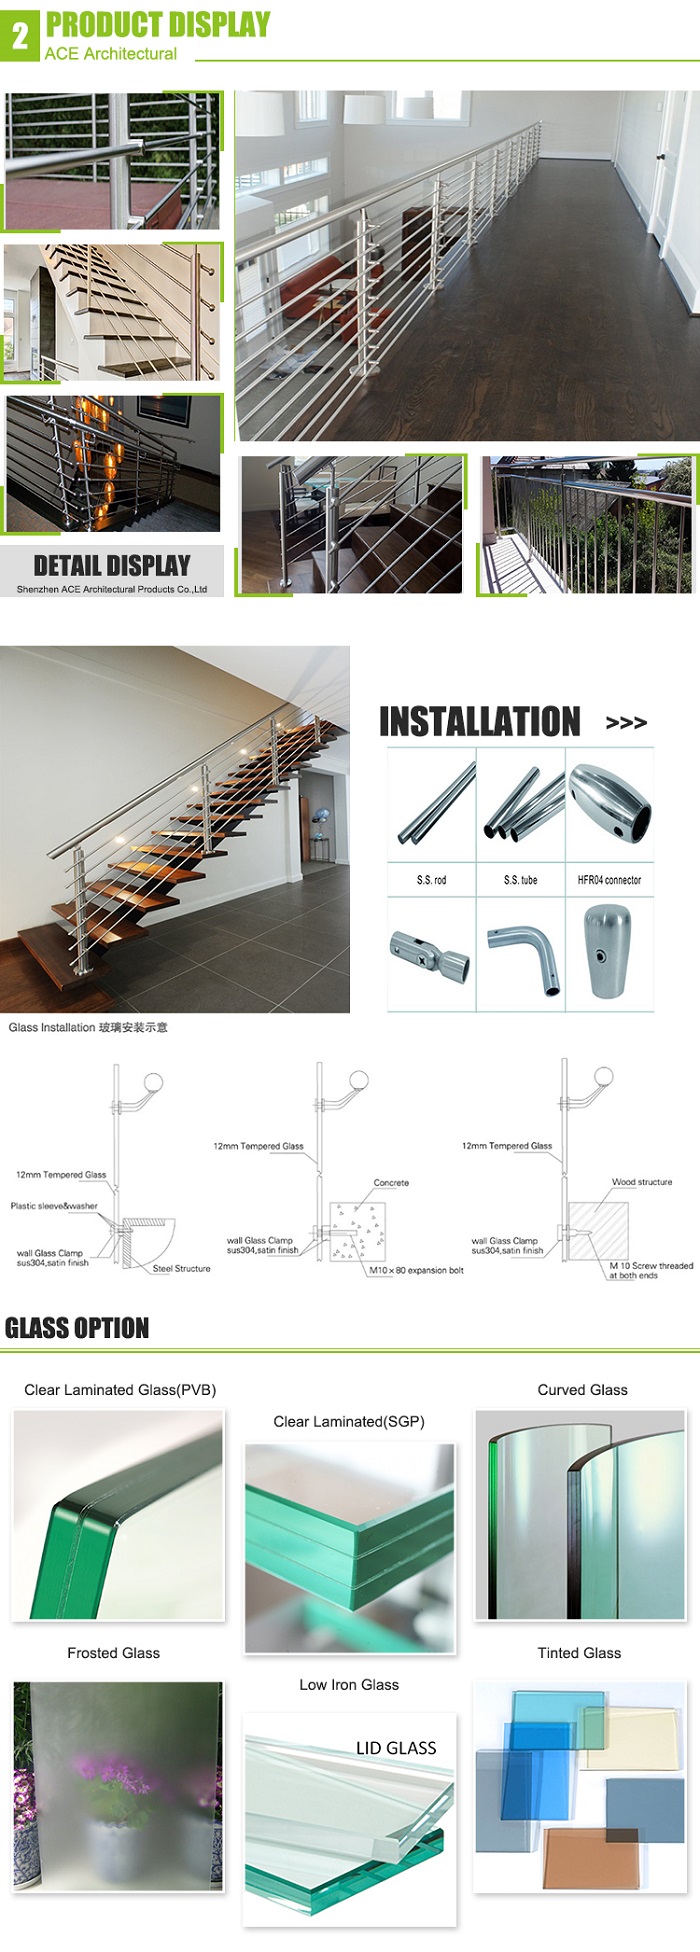 DIY stainless steel balustrade systems with solid rod bar design